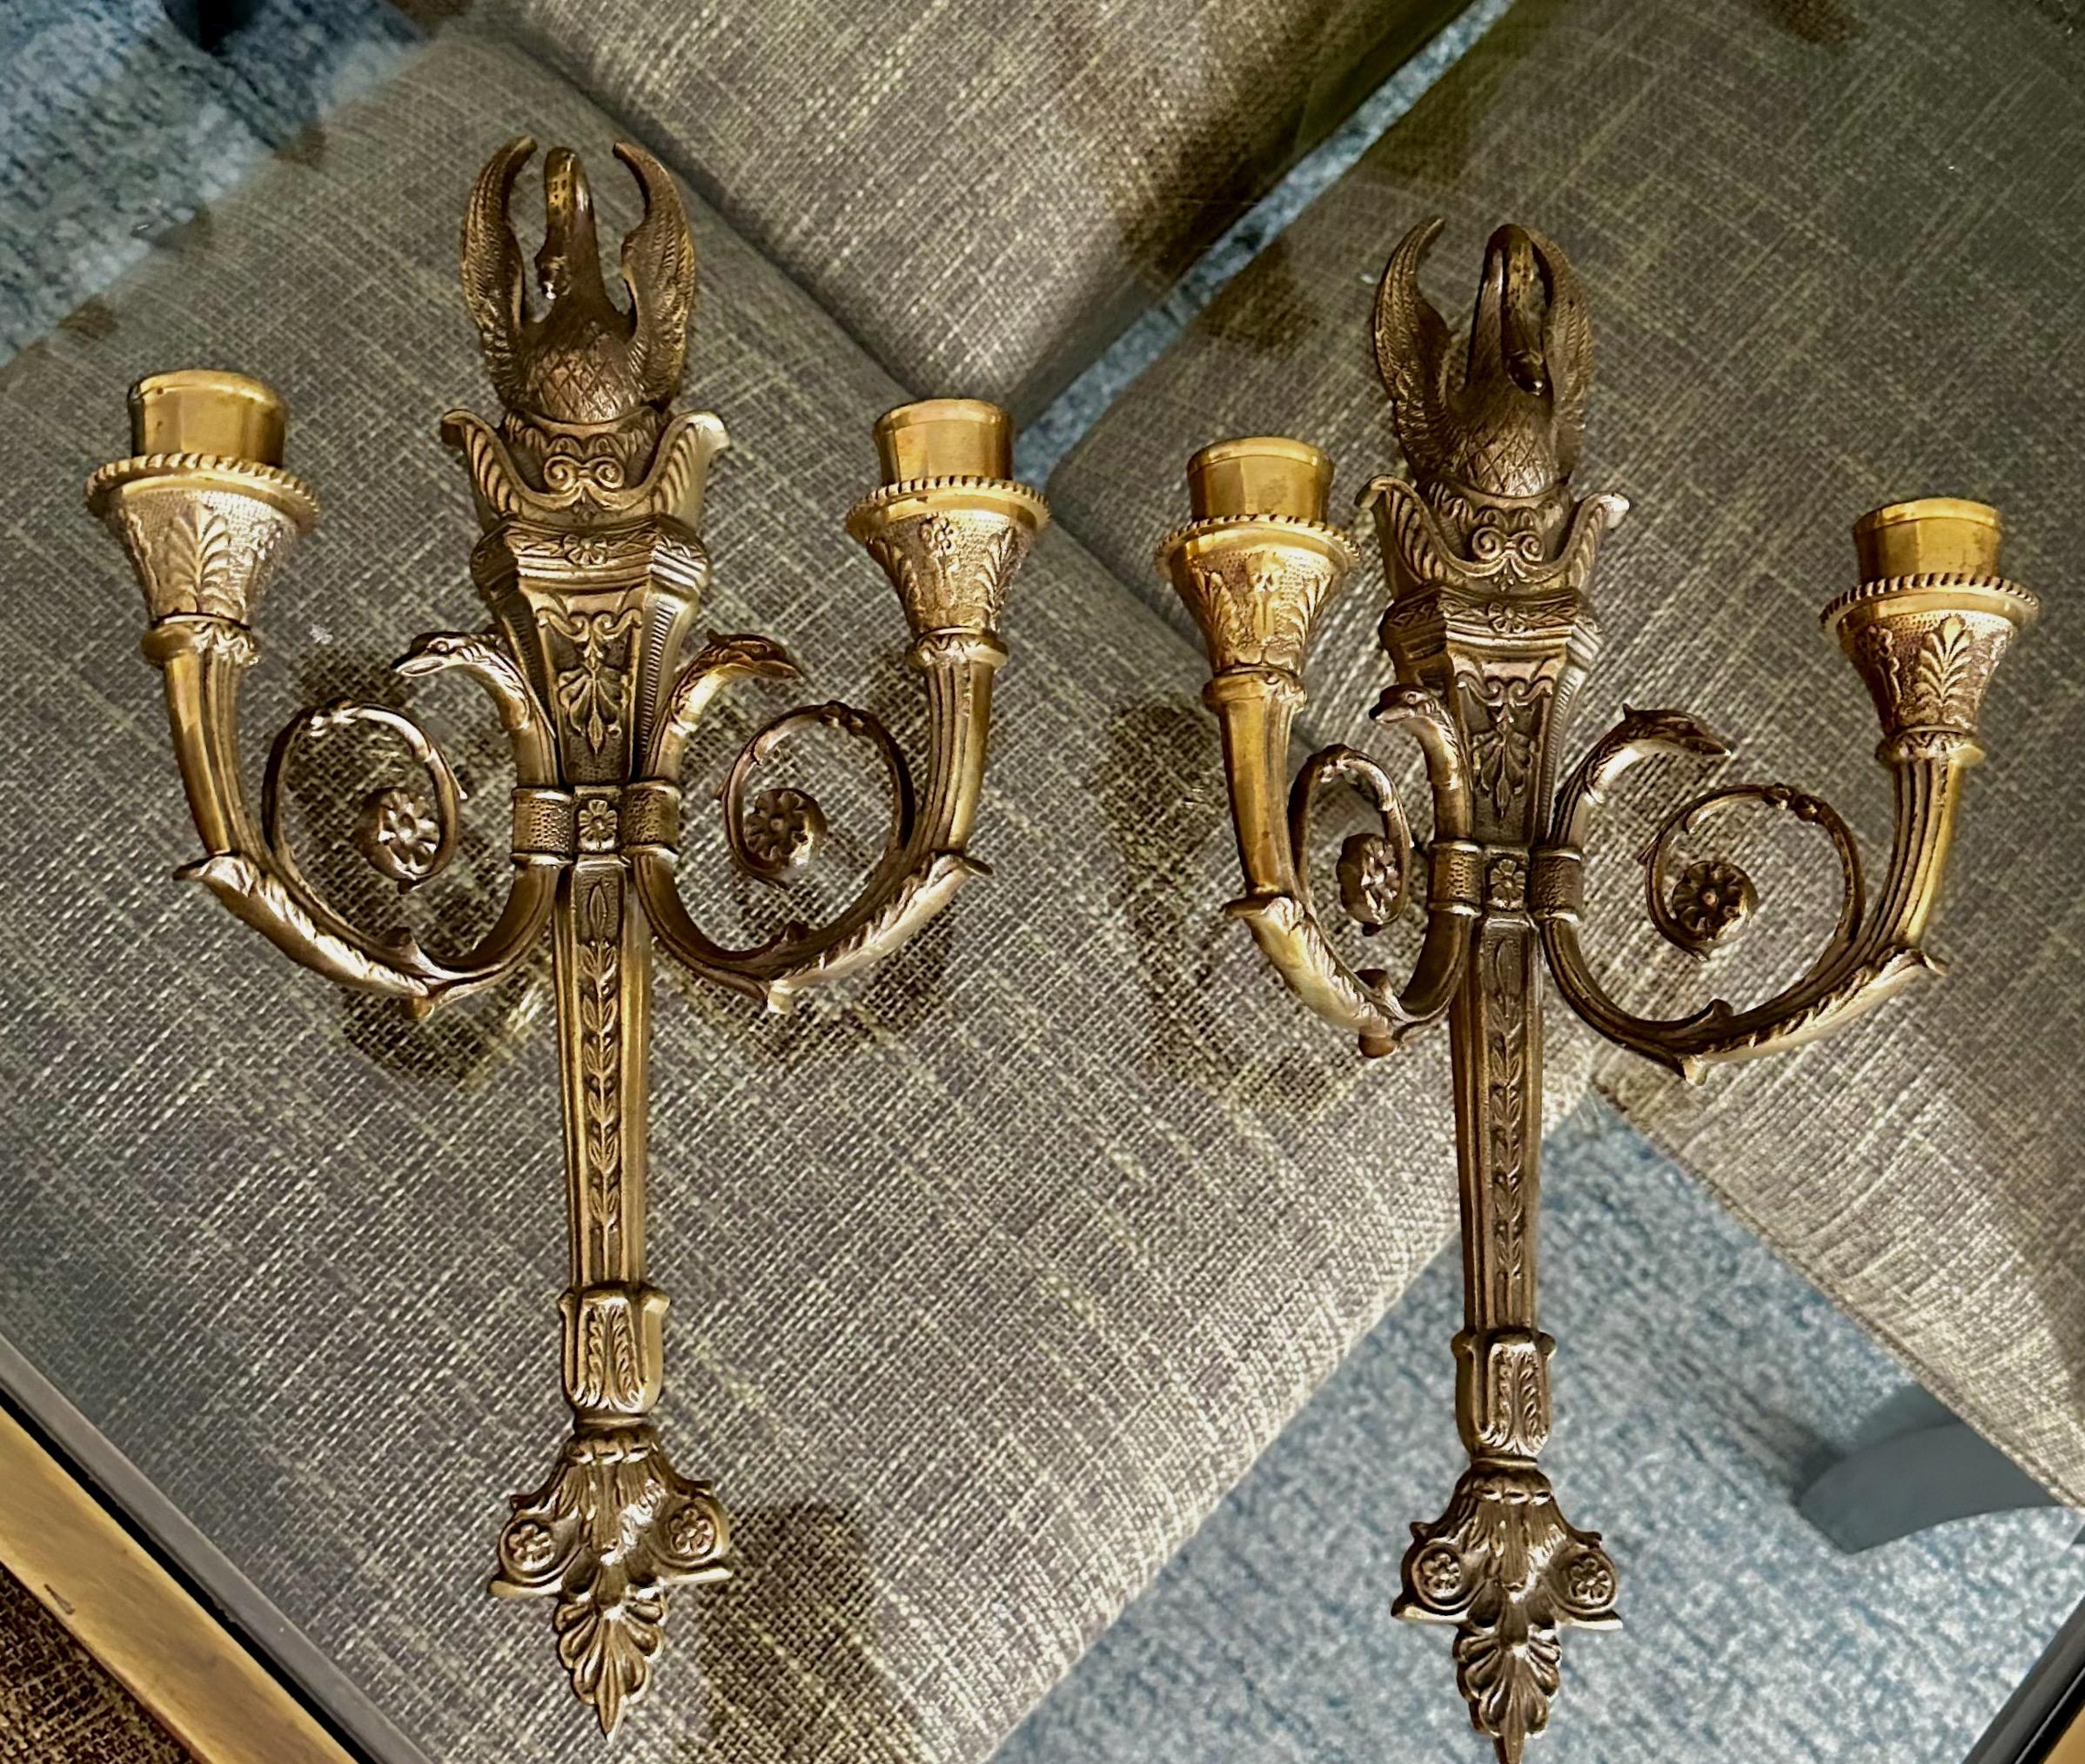 Pair of French Empire style bronze or brass candle wall sconces with swan and serpent motif. Expertly executed with fine detailing throughout. Not electrified uses candles only. 